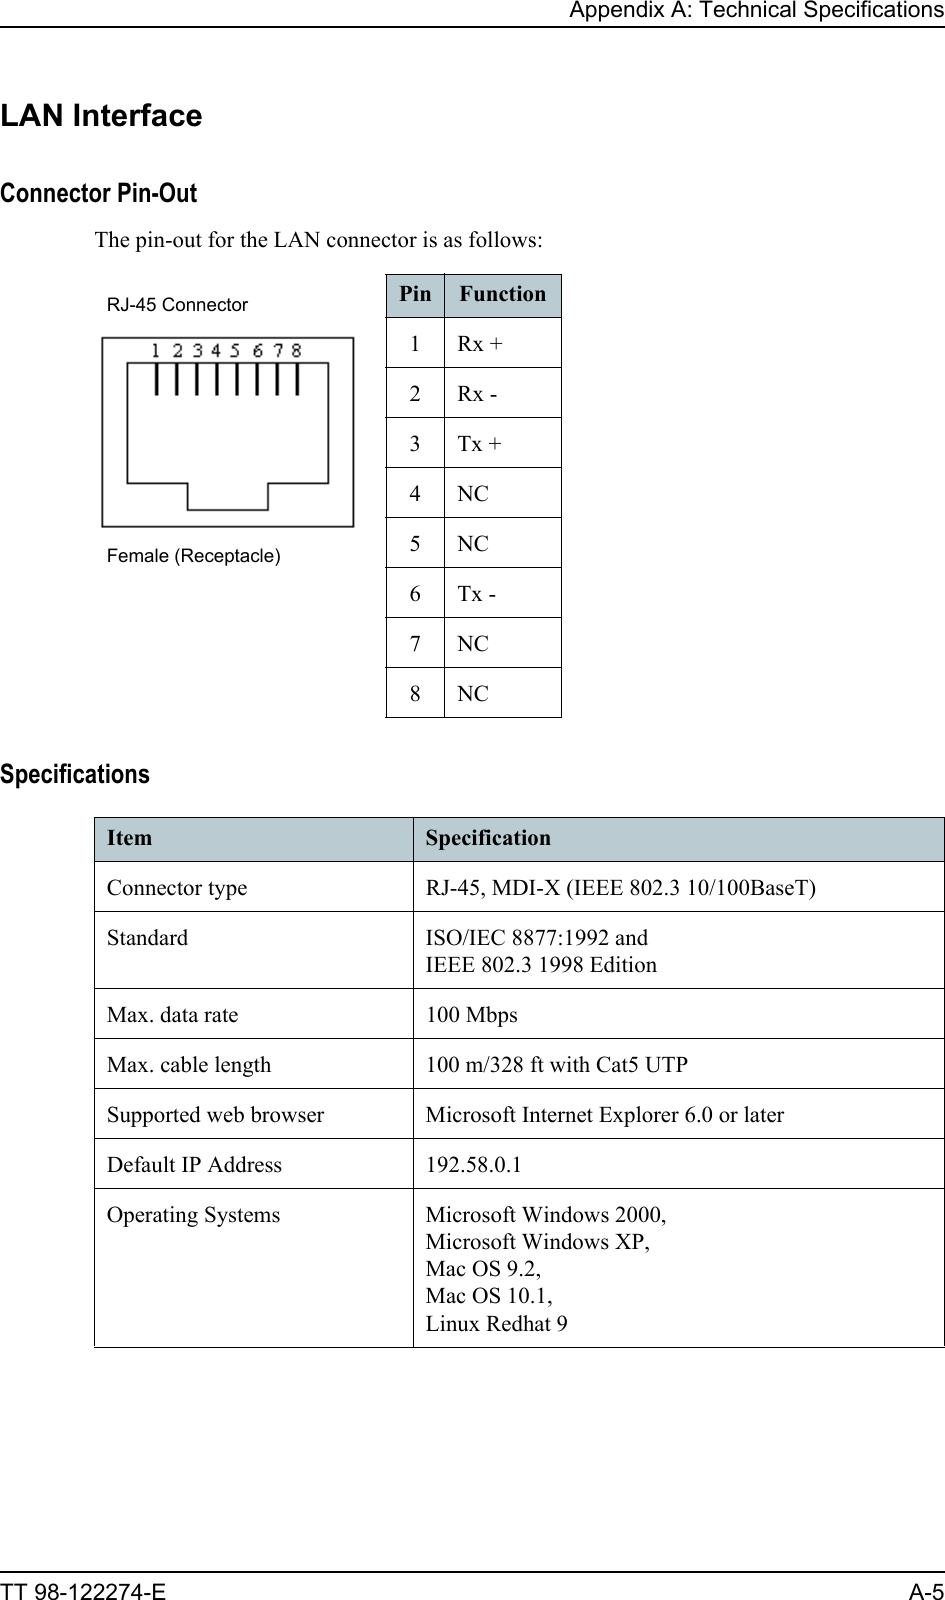 Appendix A: Technical SpecificationsTT 98-122274-E A-5LAN InterfaceConnector Pin-OutThe pin-out for the LAN connector is as follows:SpecificationsPin Function1Rx +2Rx -3Tx +4NC5NC6Tx -7NC8NCRJ-45 ConnectorFemale (Receptacle)Item SpecificationConnector type RJ-45, MDI-X (IEEE 802.3 10/100BaseT)Standard ISO/IEC 8877:1992 and IEEE 802.3 1998 EditionMax. data rate 100 MbpsMax. cable length 100 m/328 ft with Cat5 UTPSupported web browser Microsoft Internet Explorer 6.0 or laterDefault IP Address 192.58.0.1Operating Systems Microsoft Windows 2000, Microsoft Windows XP, Mac OS 9.2,Mac OS 10.1,Linux Redhat 9